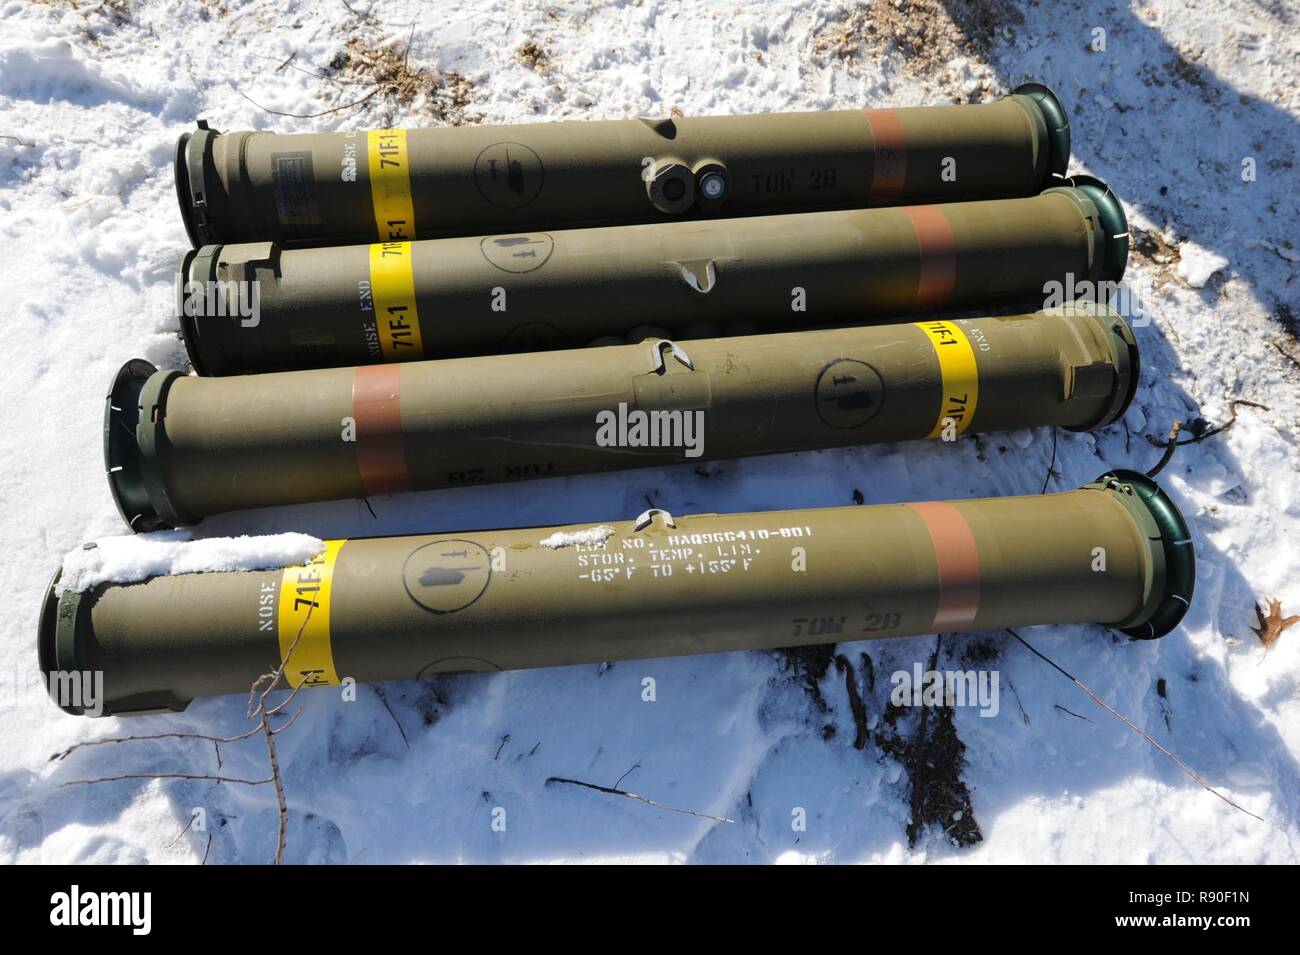 Several spent anti-tank TOW missile casings are seen  at Fort McCoy, Wis., on March 14, 2016. The  BGM-71 TOW is a Tube-launched, Optically tracked, Wire-guided  anti-tank missile currently manufactured by Raytheon. Stock Photo